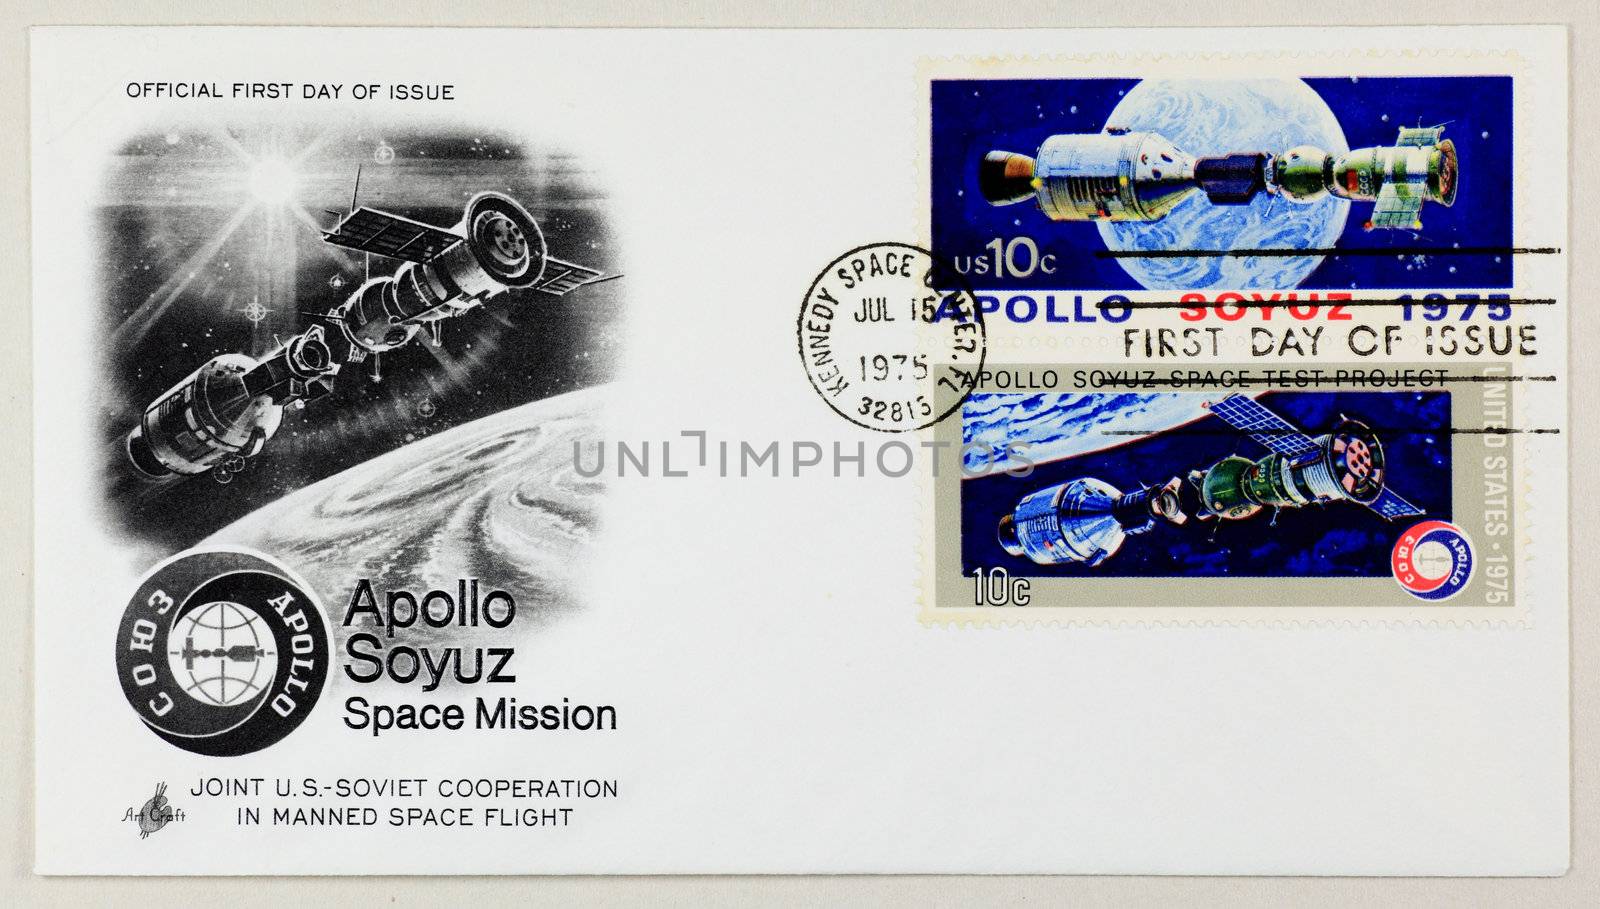 The first day issue of apollo soyuz stamp
